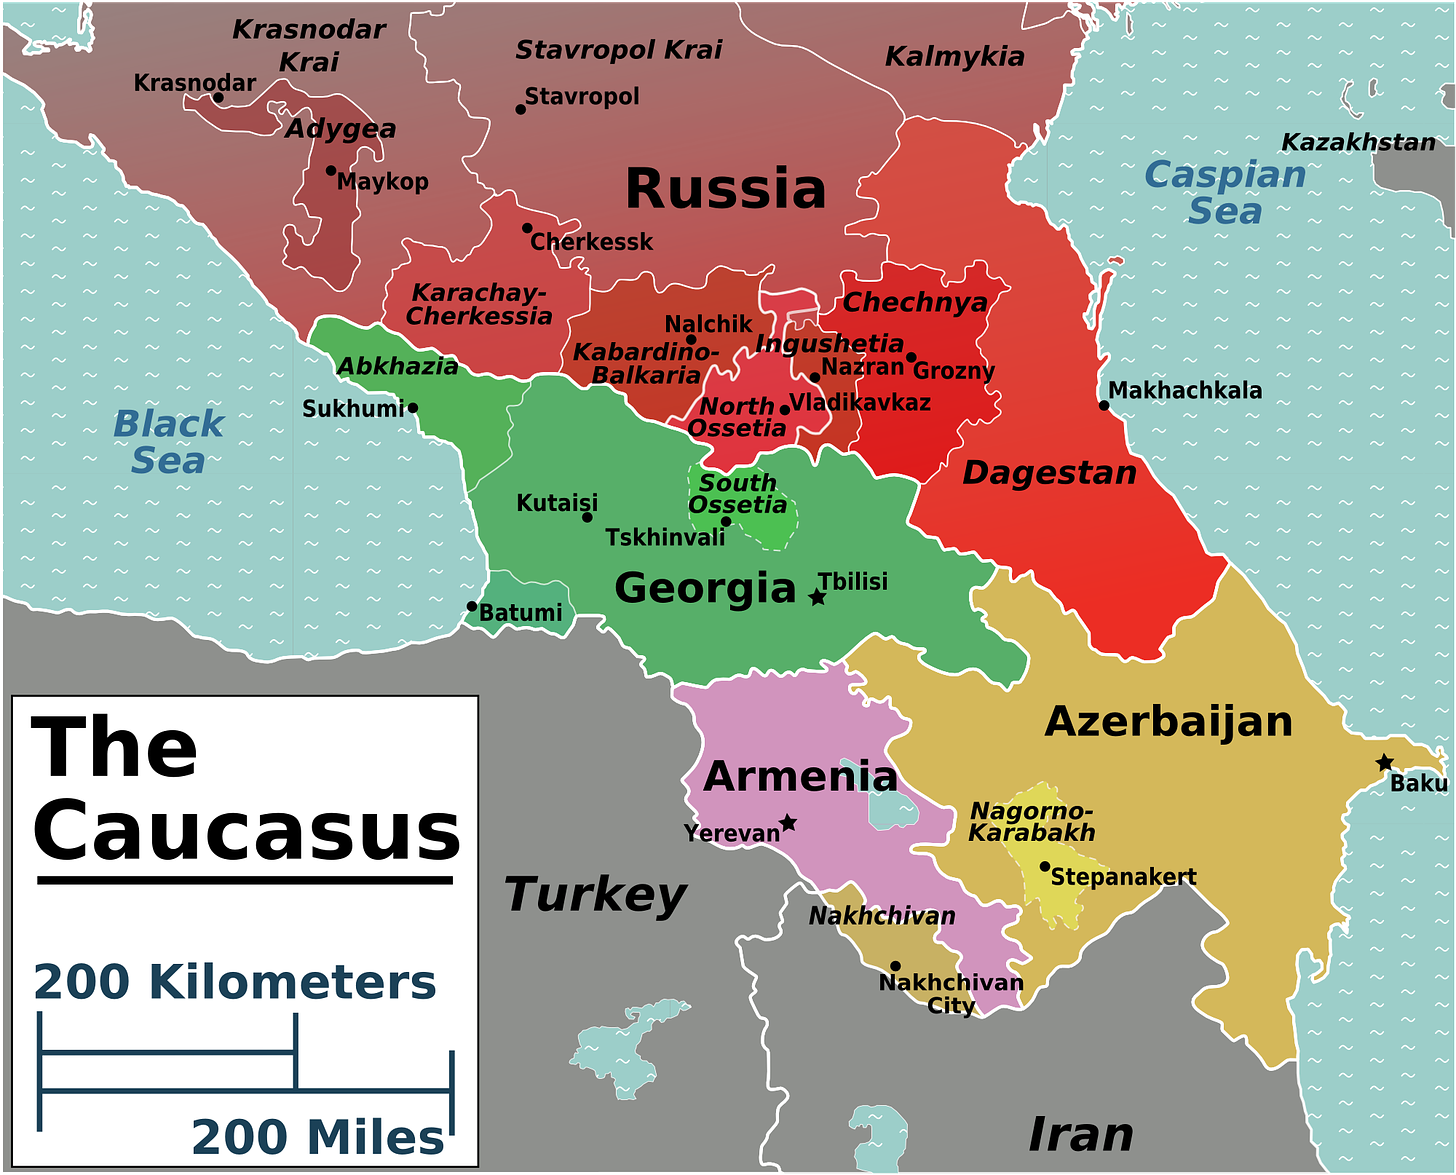 https://upload.wikimedia.org/wikipedia/commons/a/a6/Caucasus_regions_map.png